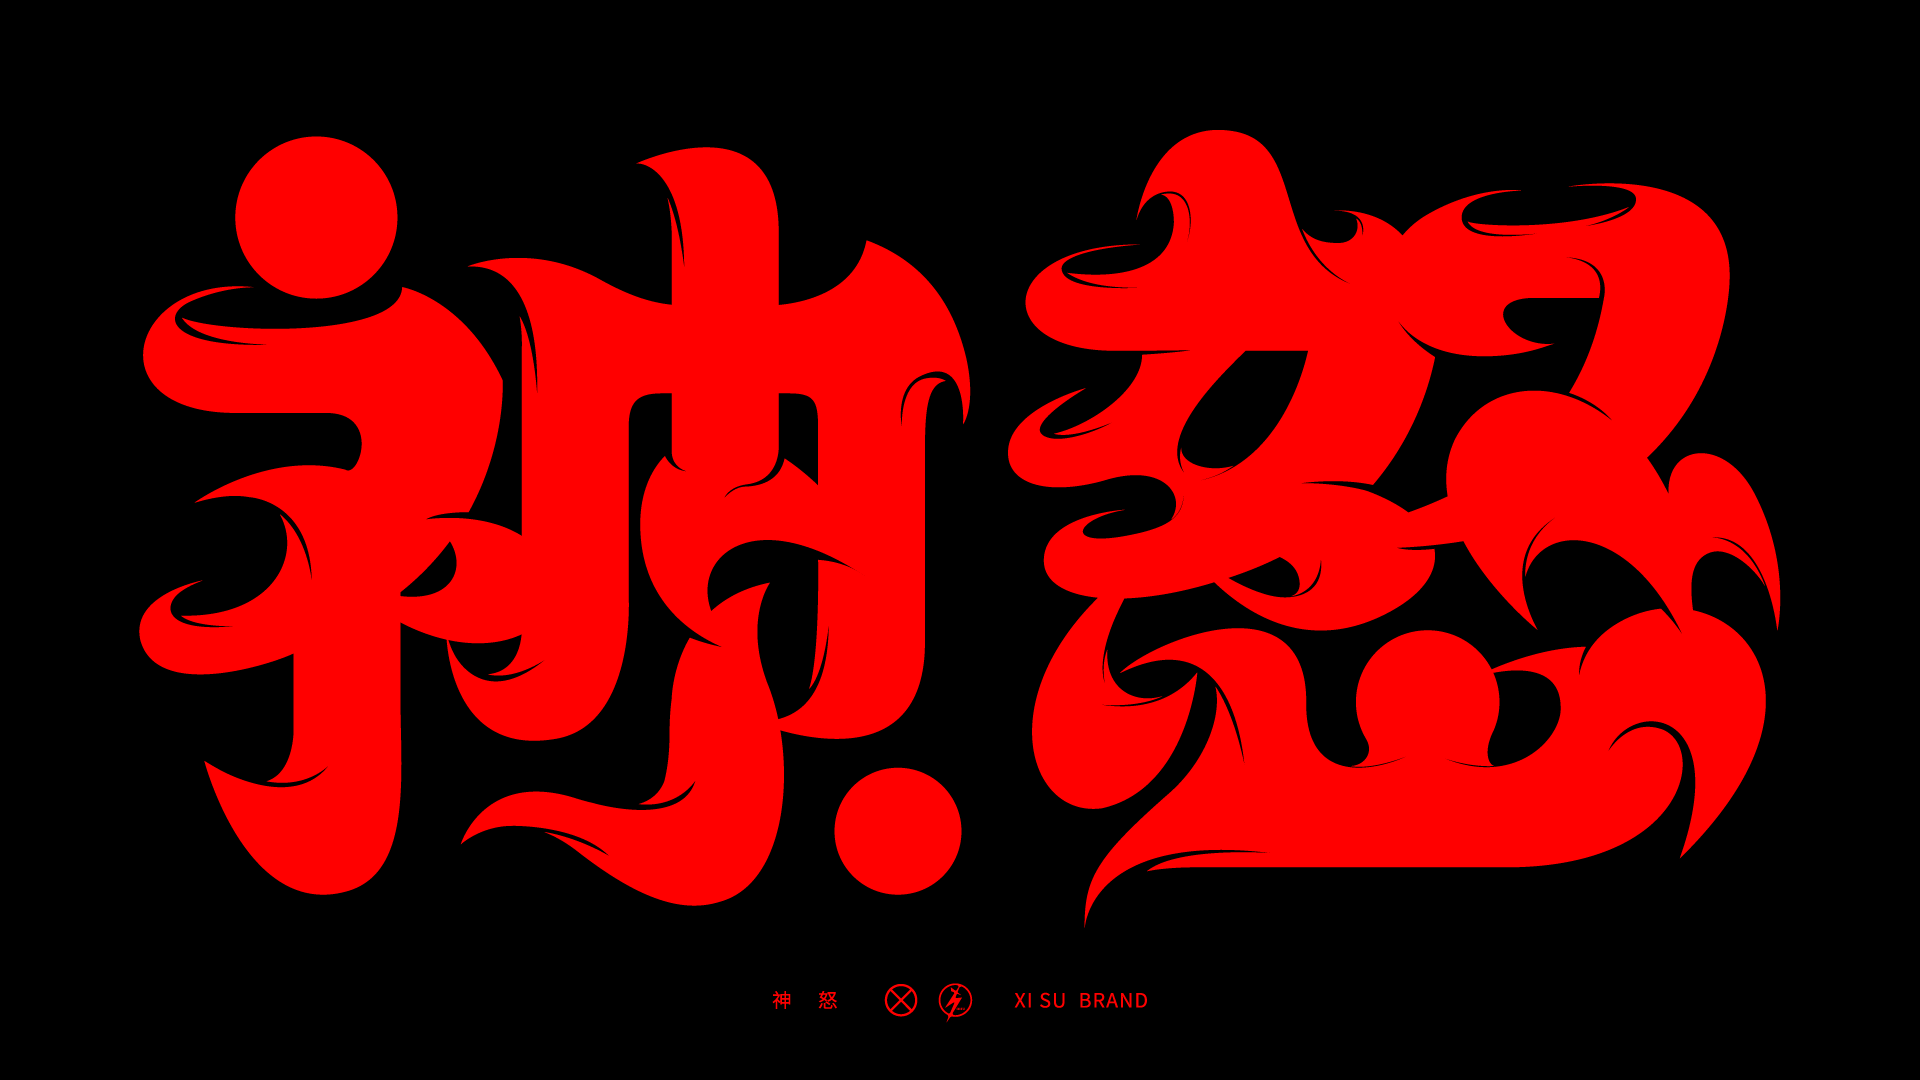 26P Collection of the latest Chinese font design schemes in 2021 #.241